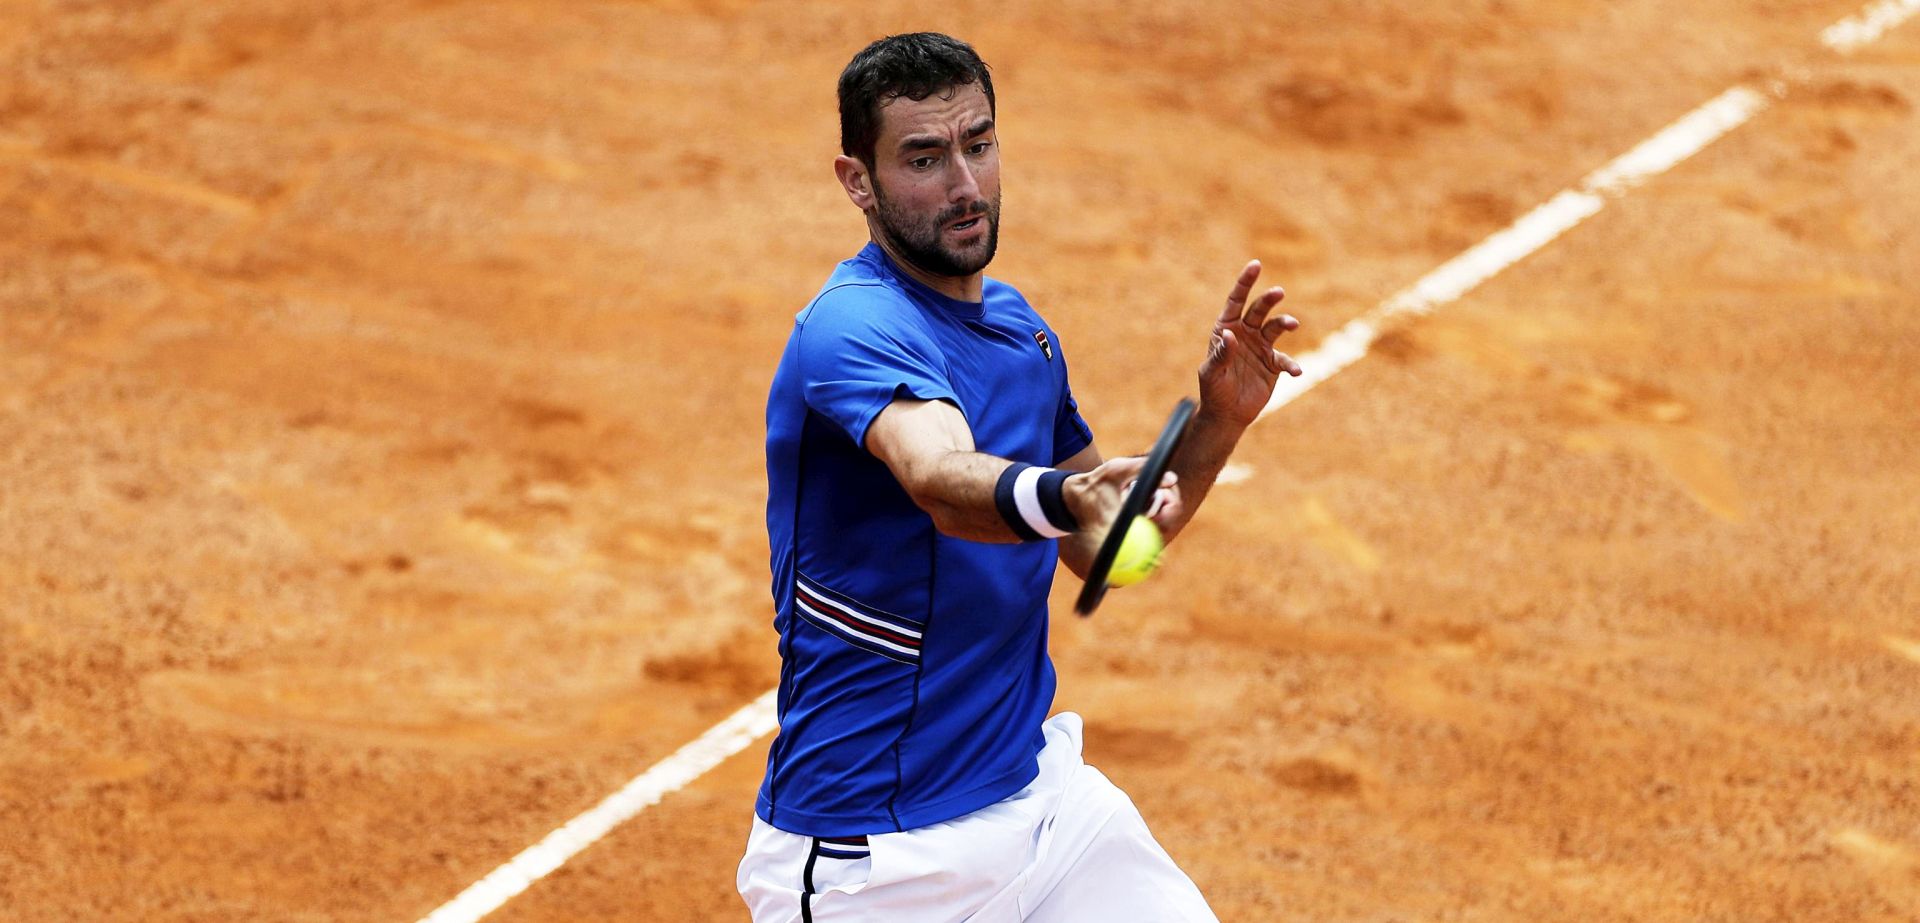 epa07569887 Marin Cilic of Croatia in action against Andrea Basso of Italy during their men's singles first round match at the Italian Open tennis tournament in Rome, Italy, 14 May 2019.  EPA/RICCARDO ANTIMIANI